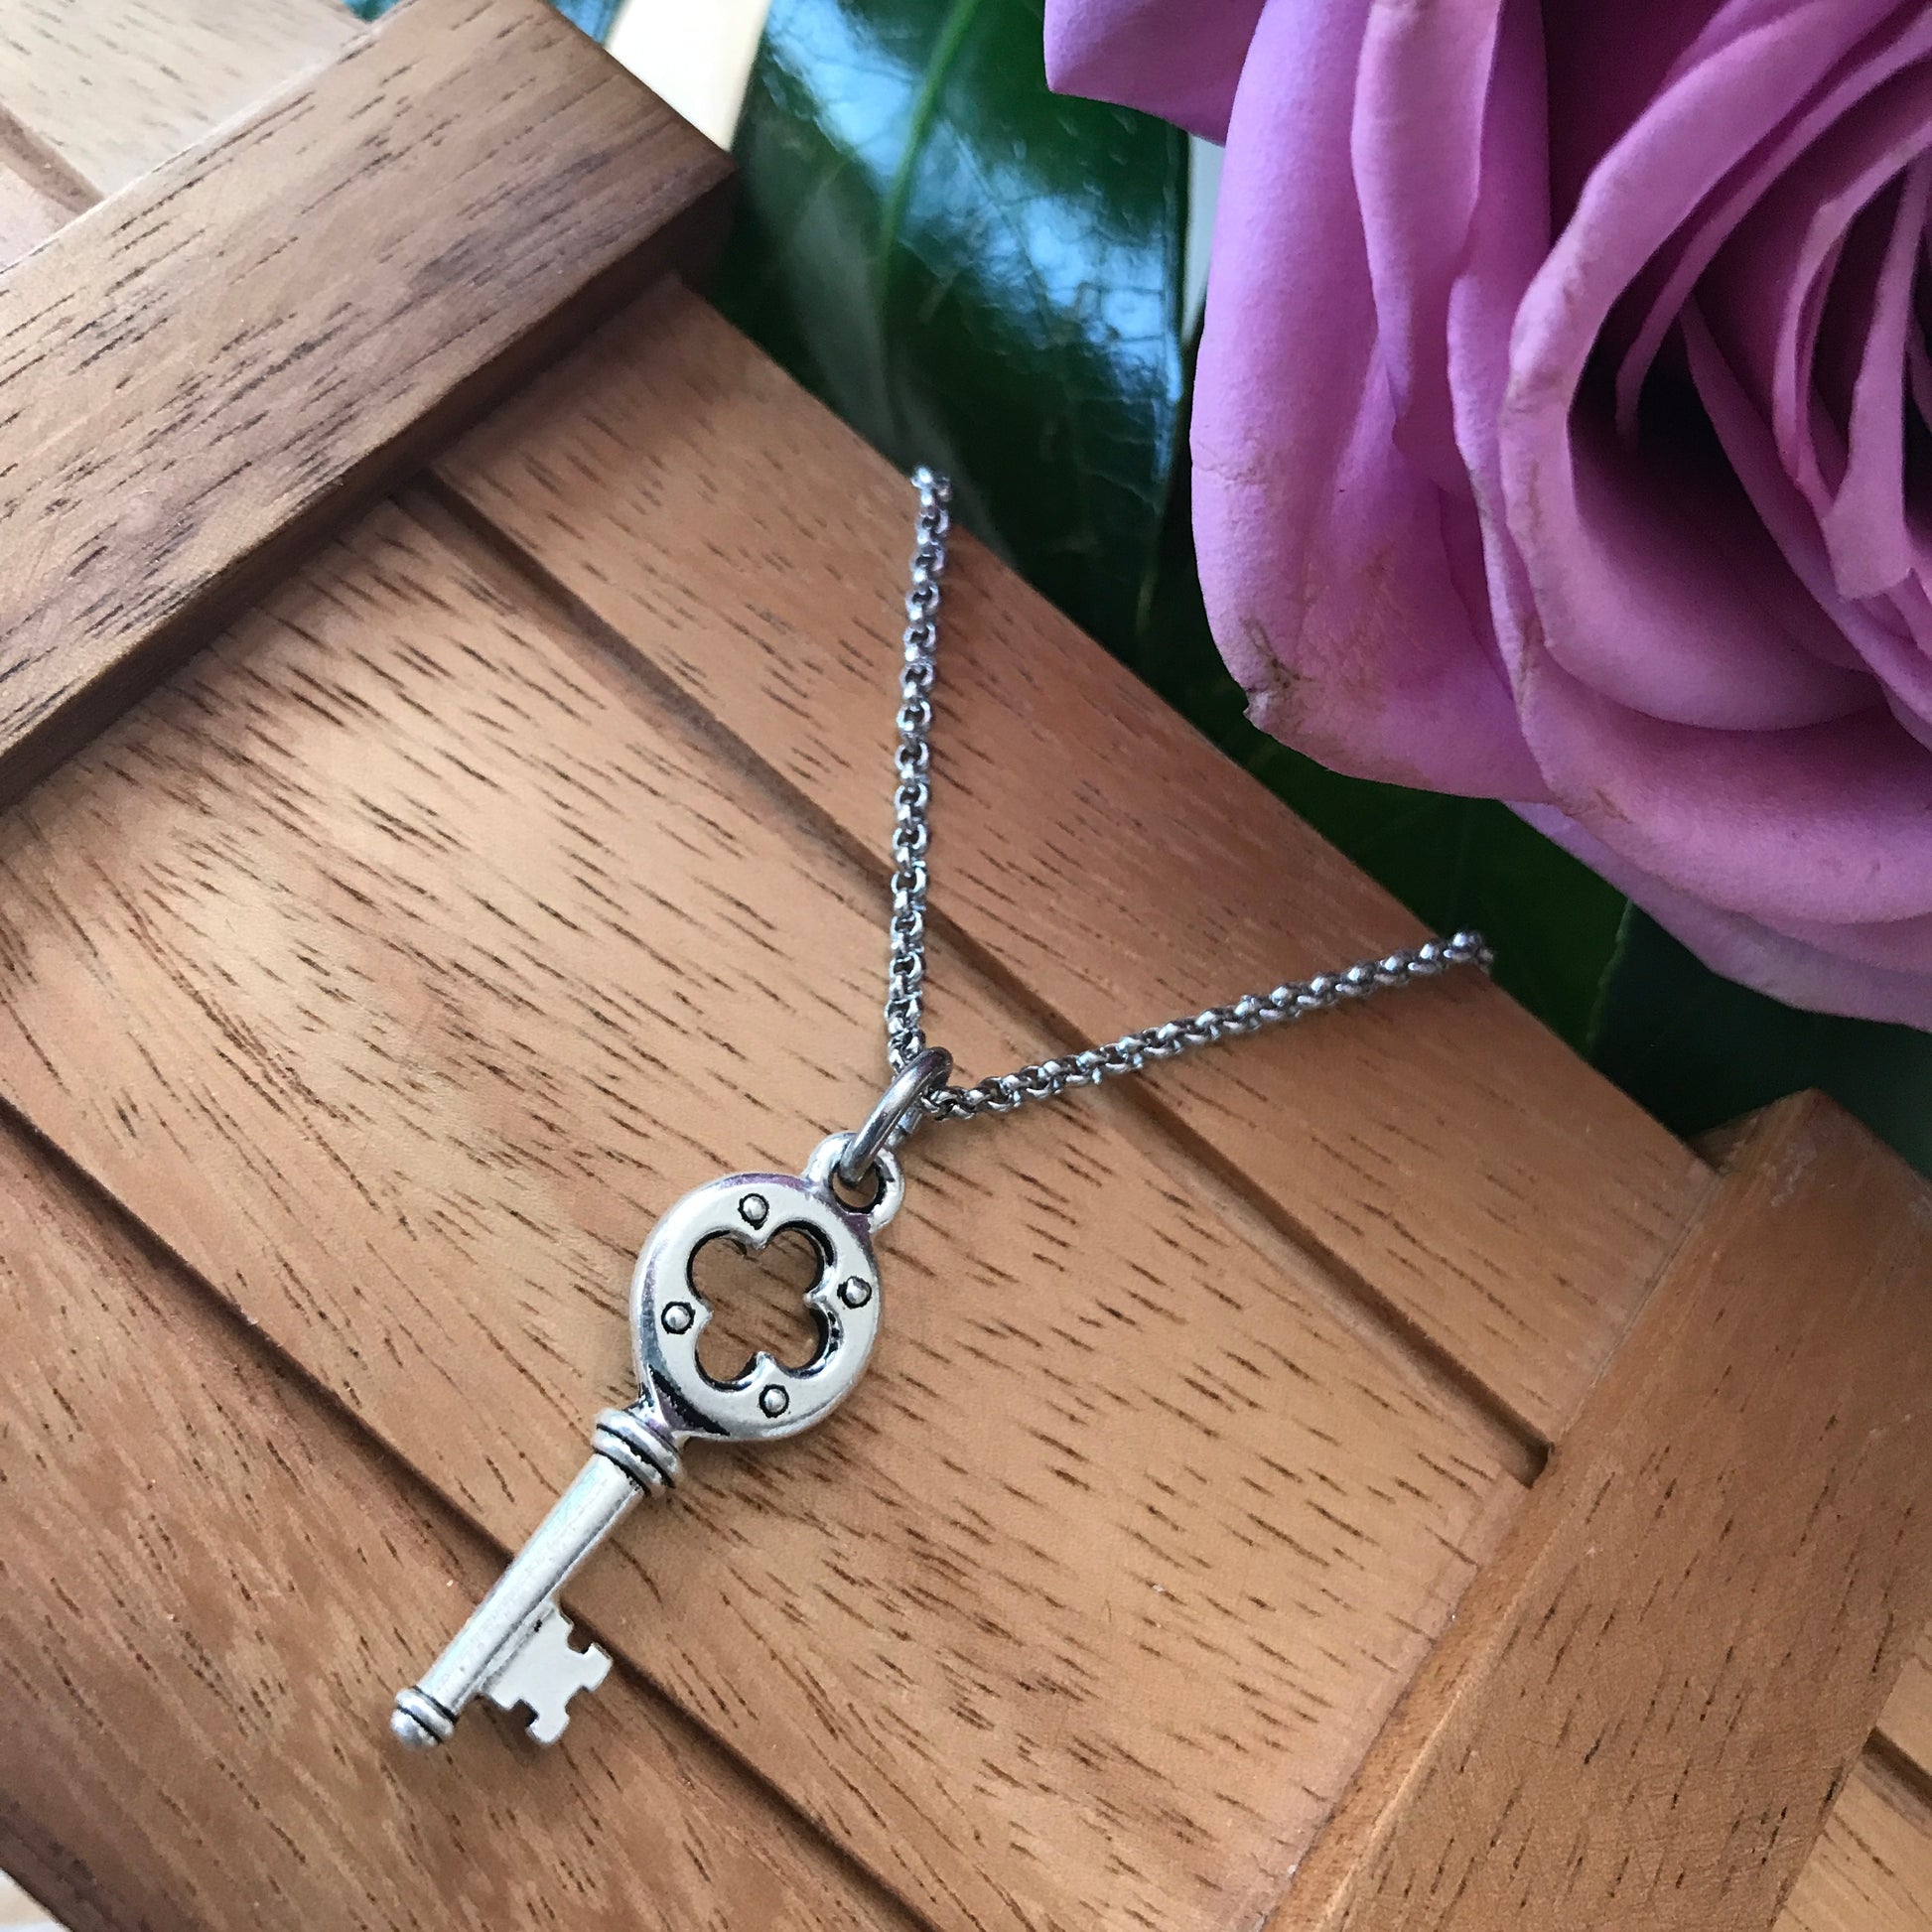 Loralyn Designs Small Silver Key Charm Necklace